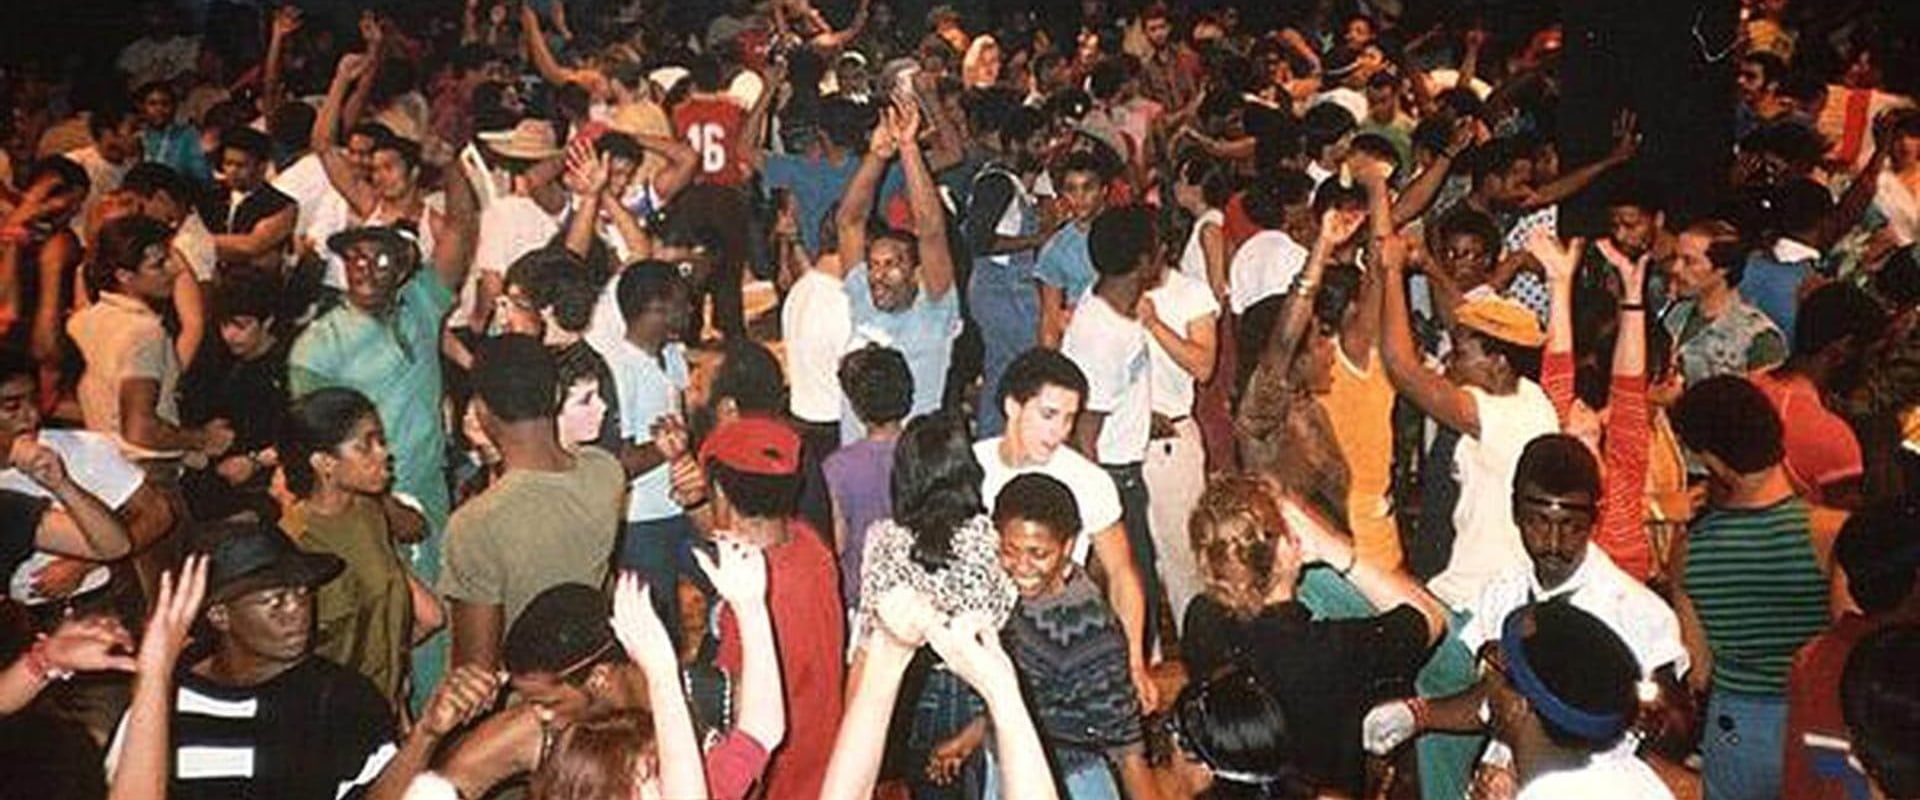 The Ultimate Guide to Paradise Garage in New York City